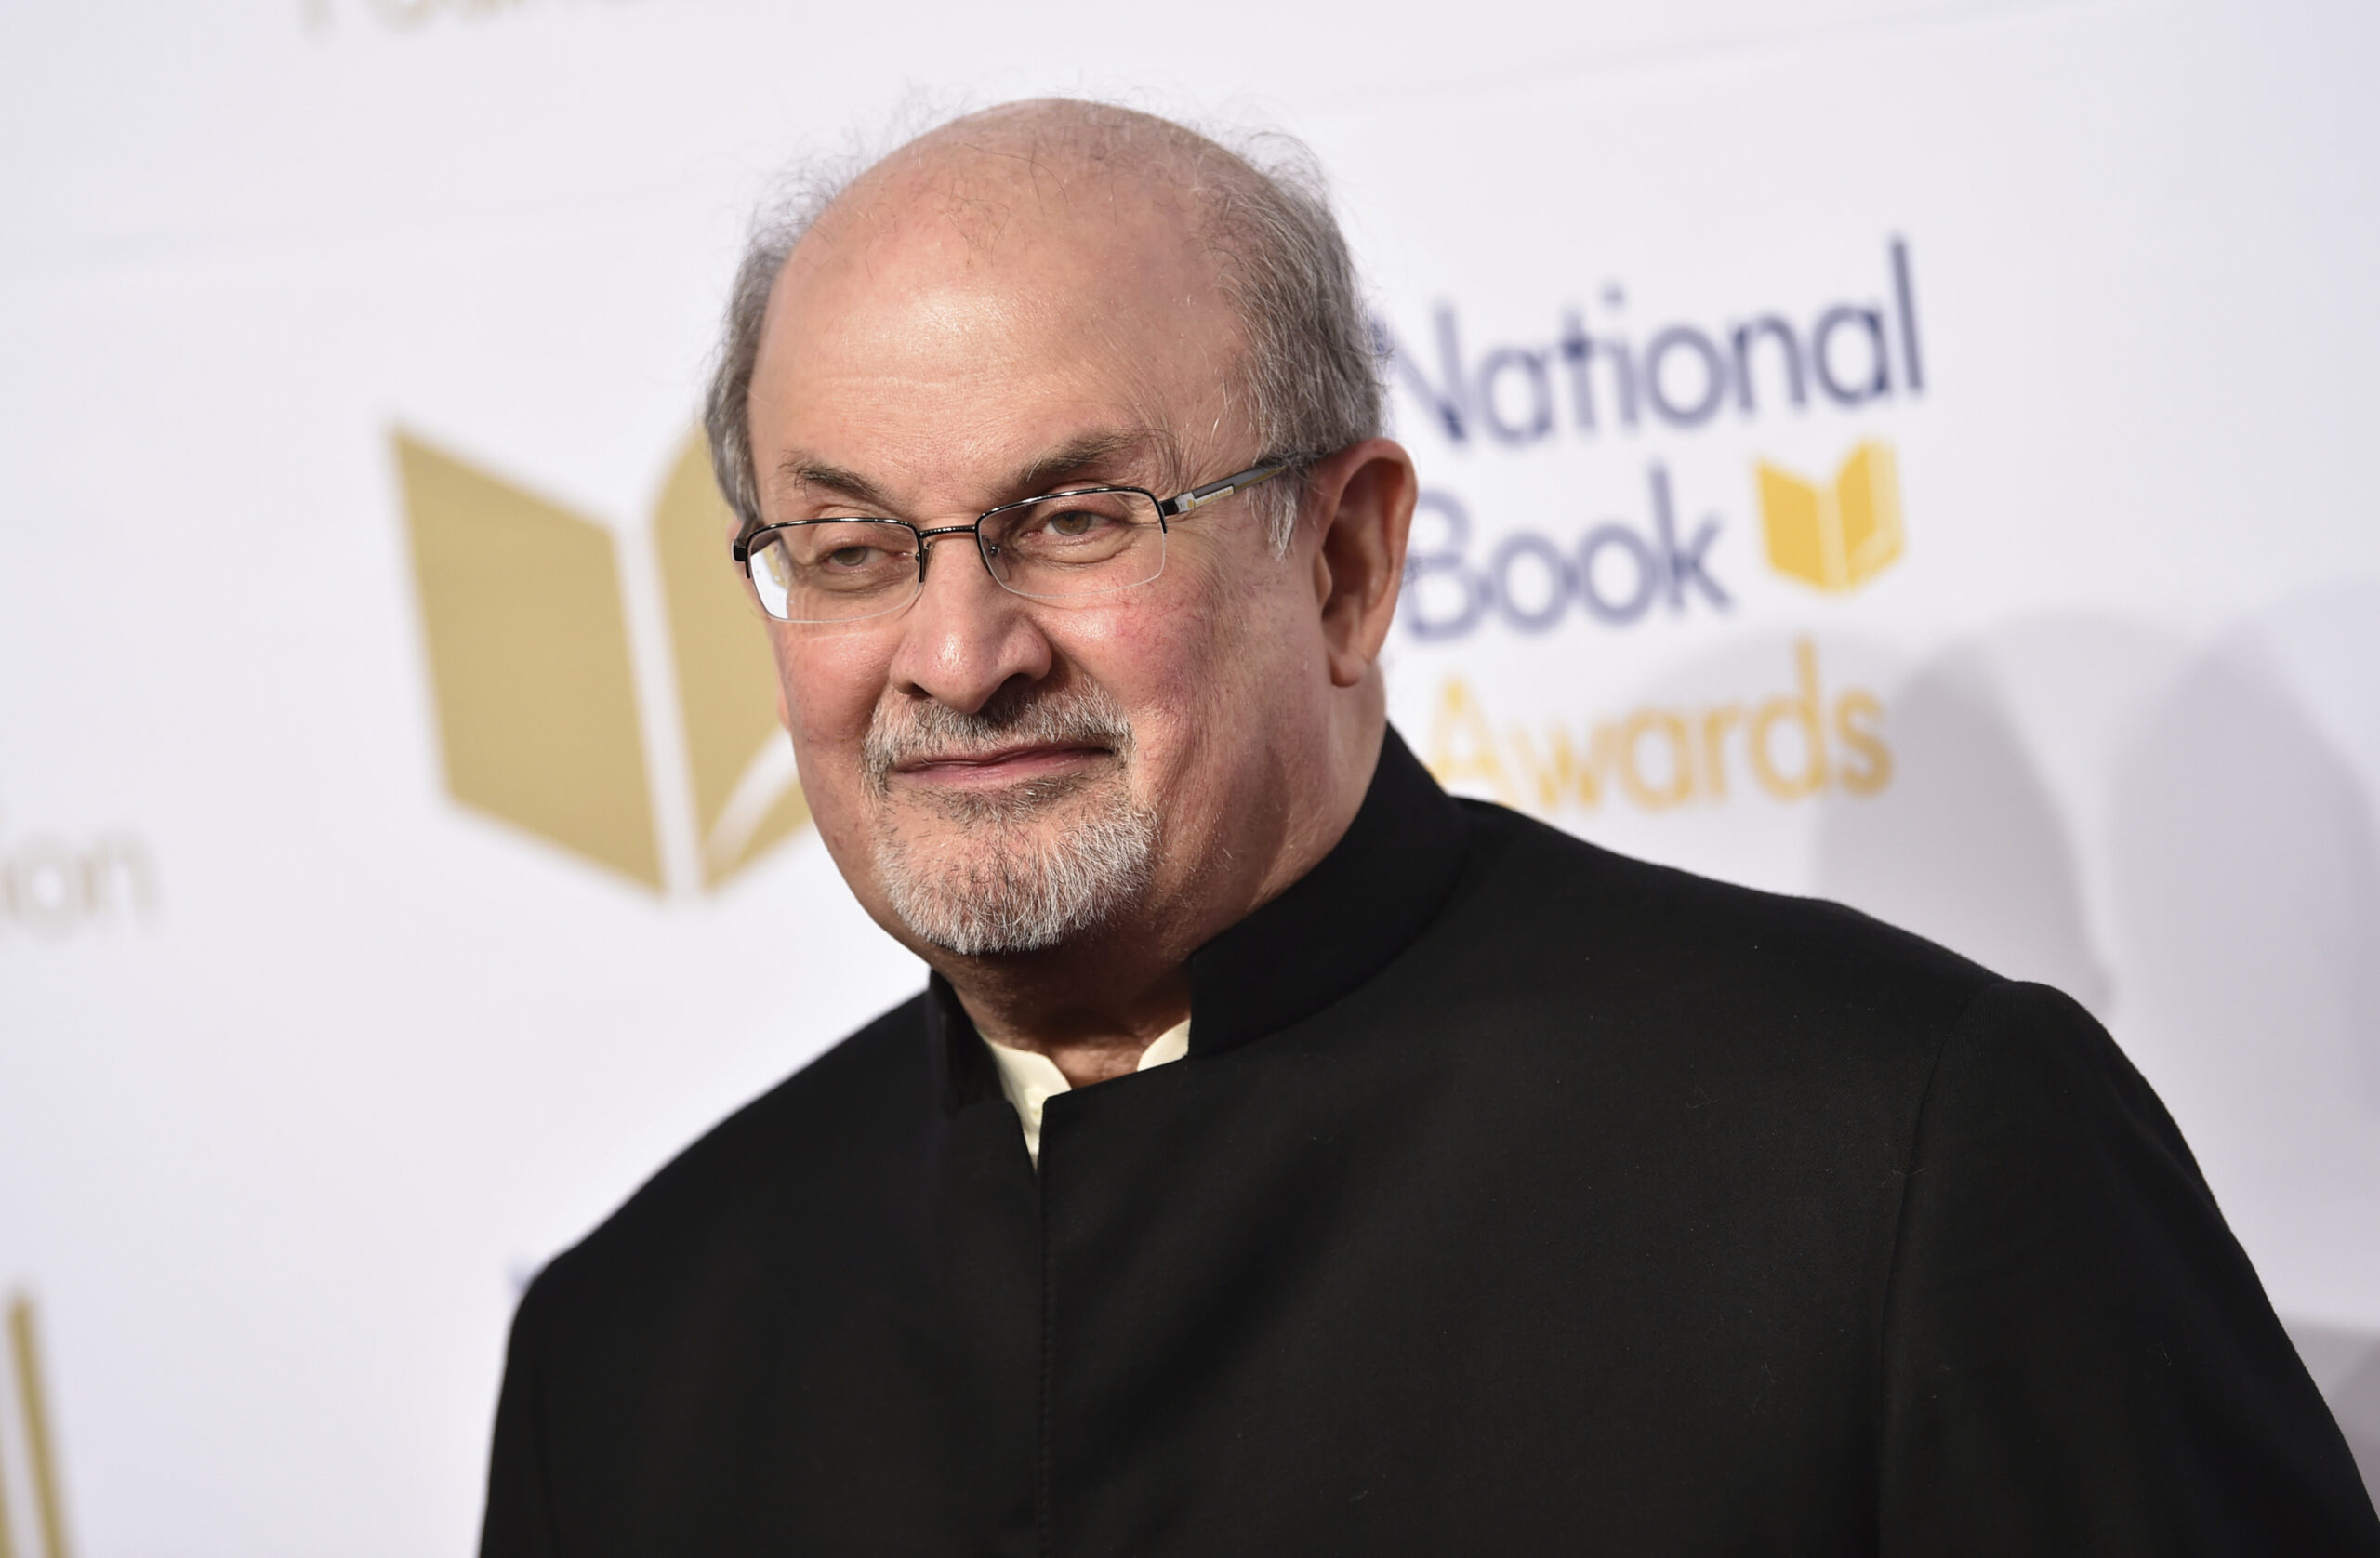 FILE - Salman Rushdie attends the 68th National Book Awards Ceremony and Benefit Dinner on Nov. 15, 2017, in New York. Months after being stabbed repeatedly as he prepared to deliver a lecture, Rushdie is blind in his right eye, struggles to write and at times has “frightening” nightmares. (Photo by Evan Agostini/Invision/AP, File)